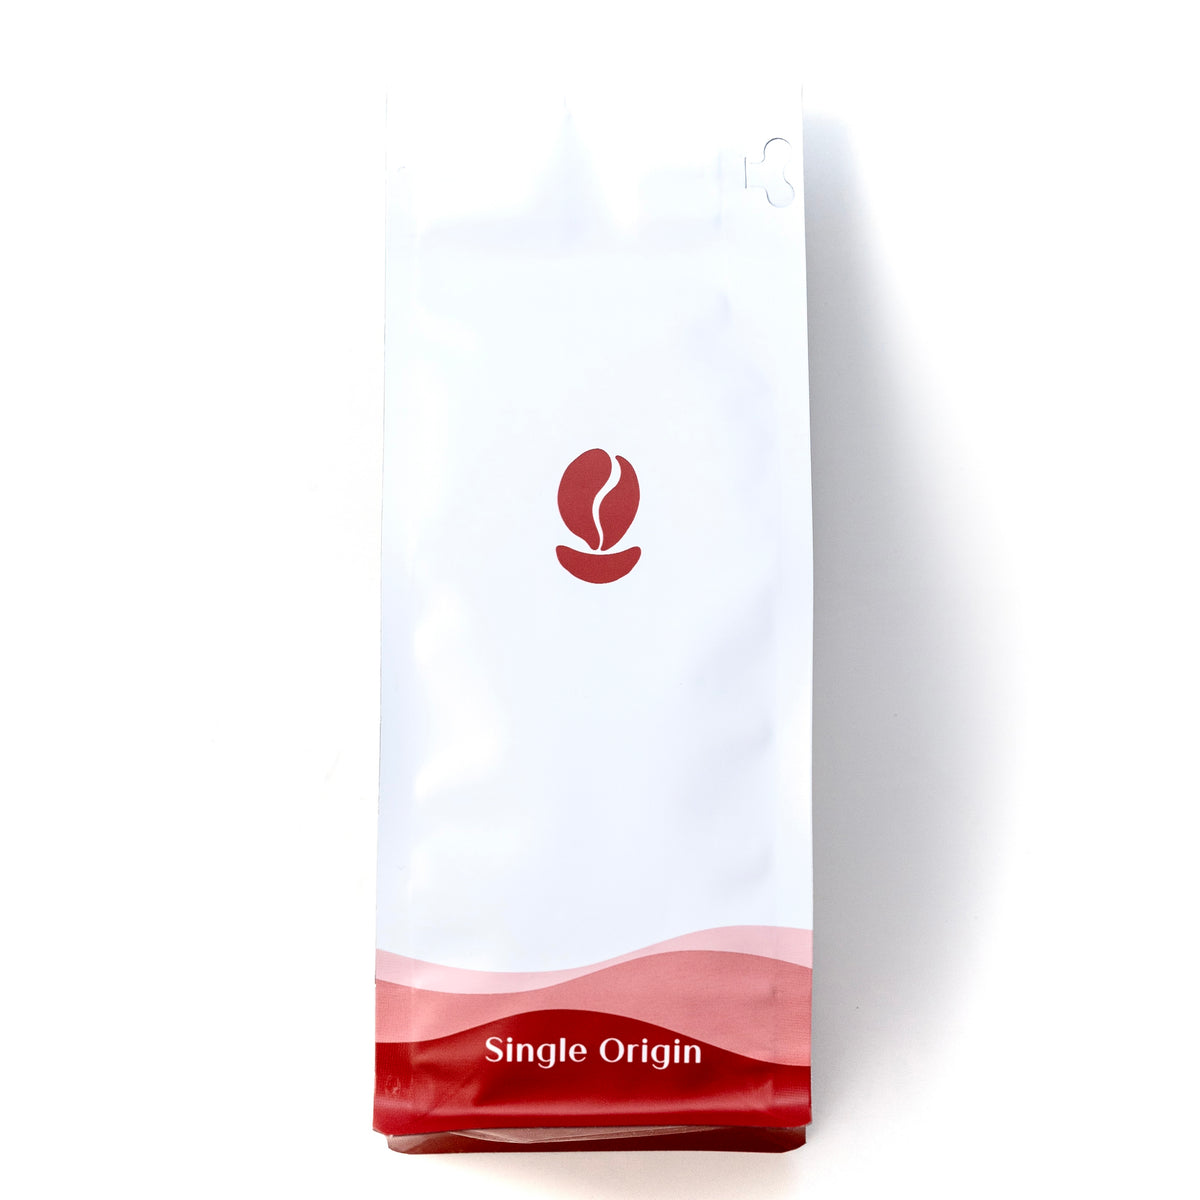 Indonesia Sumatra Mandheling G1 by Catur Coffee Company